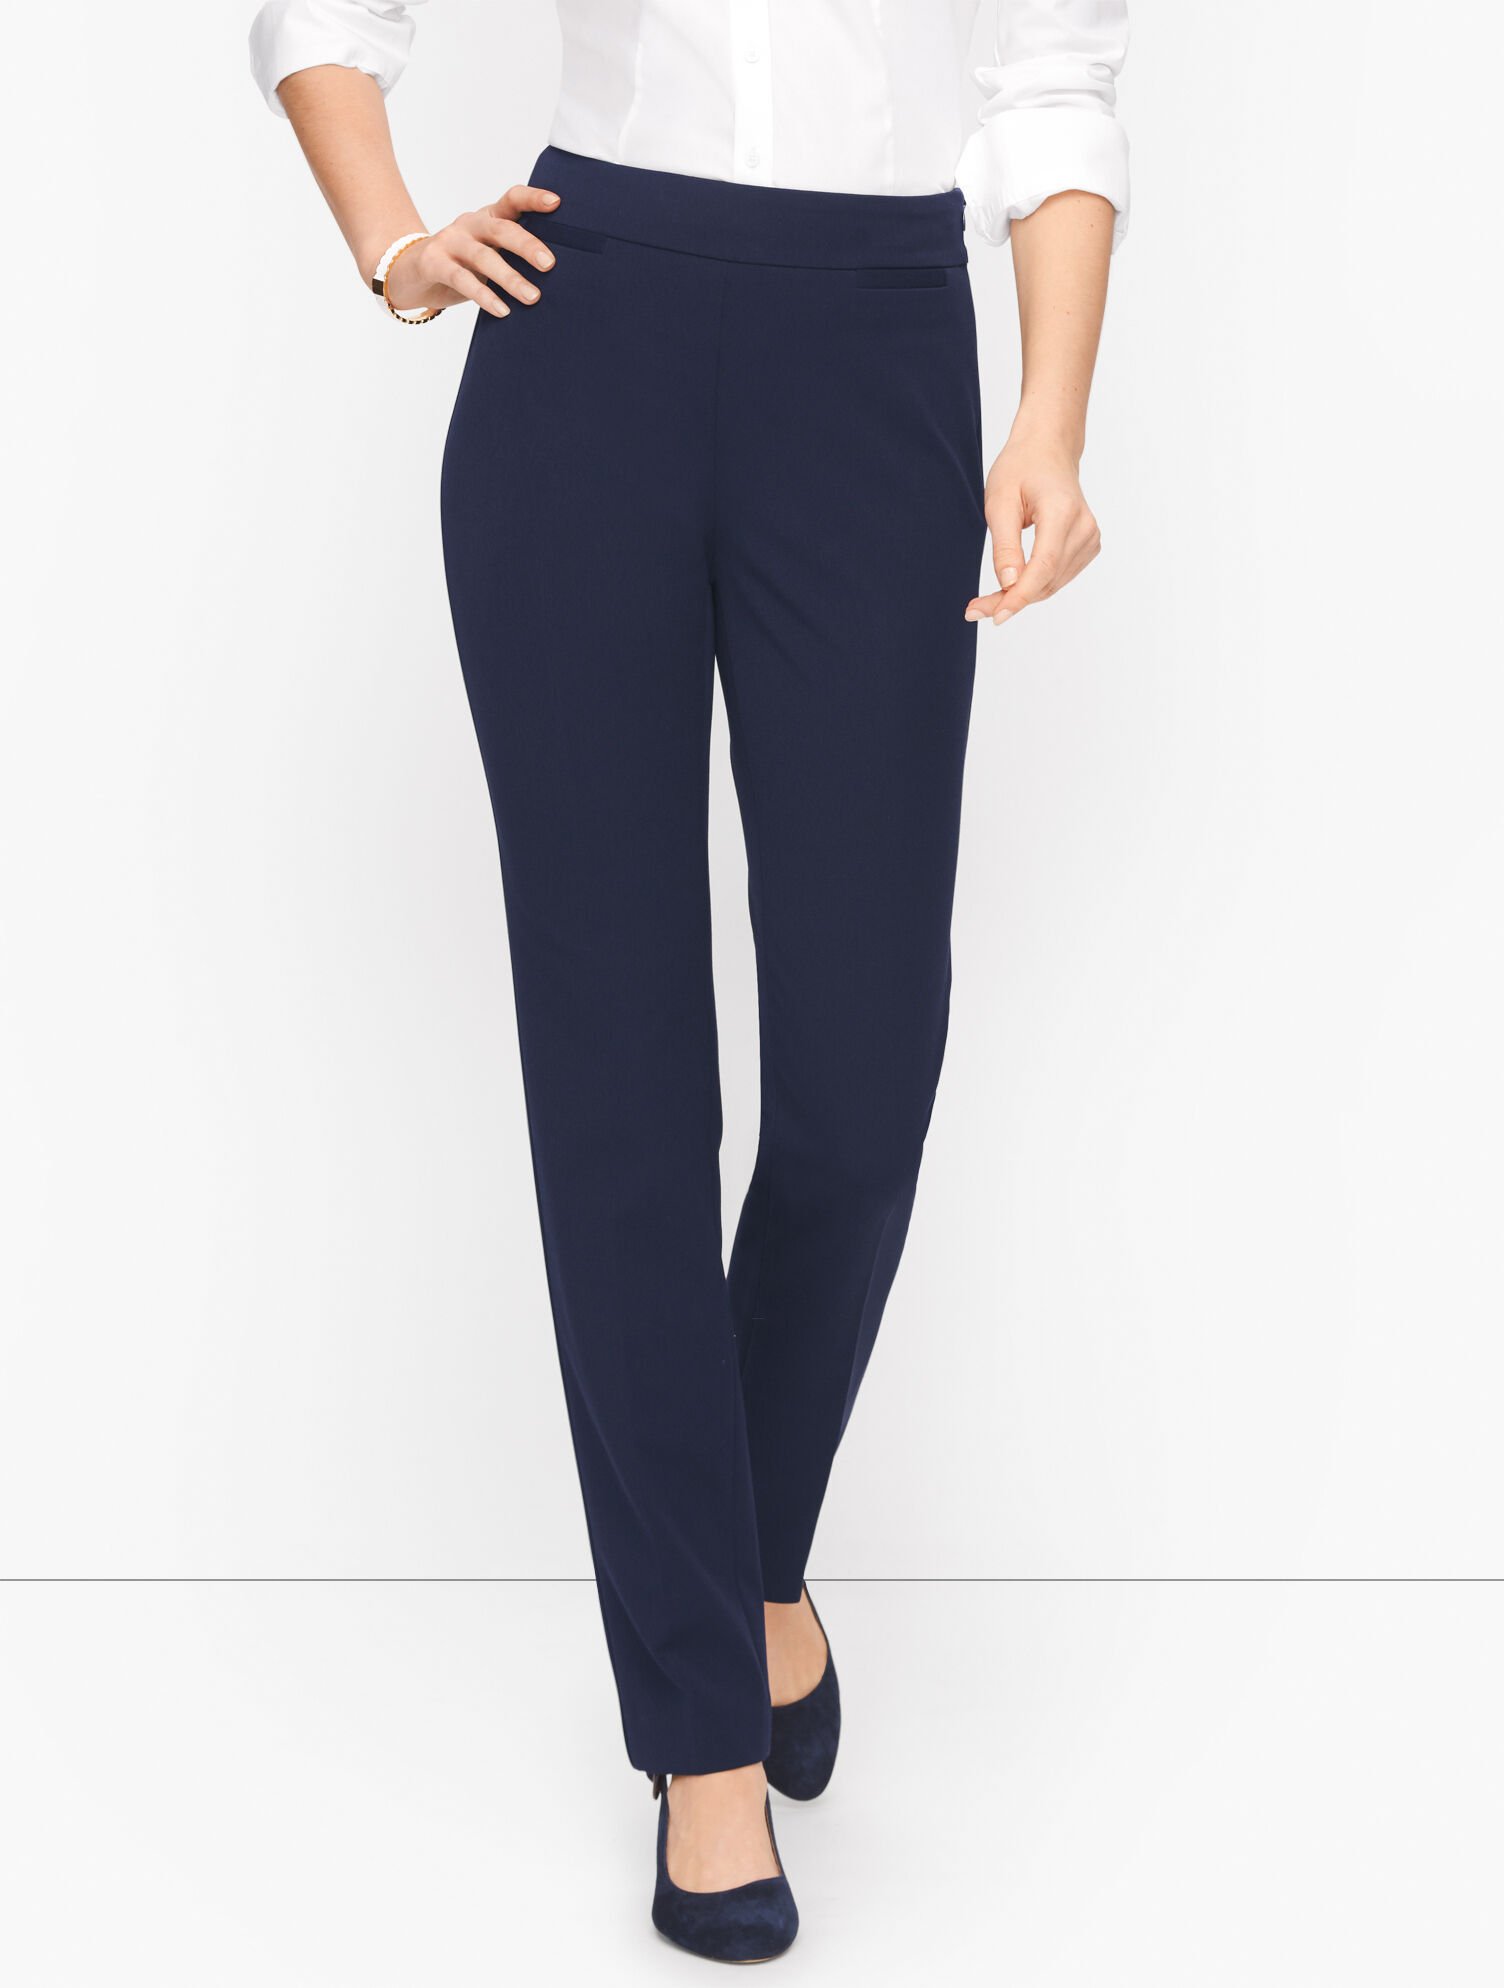 The Ankle Pant In Bi-Stretch - Curvy Fit